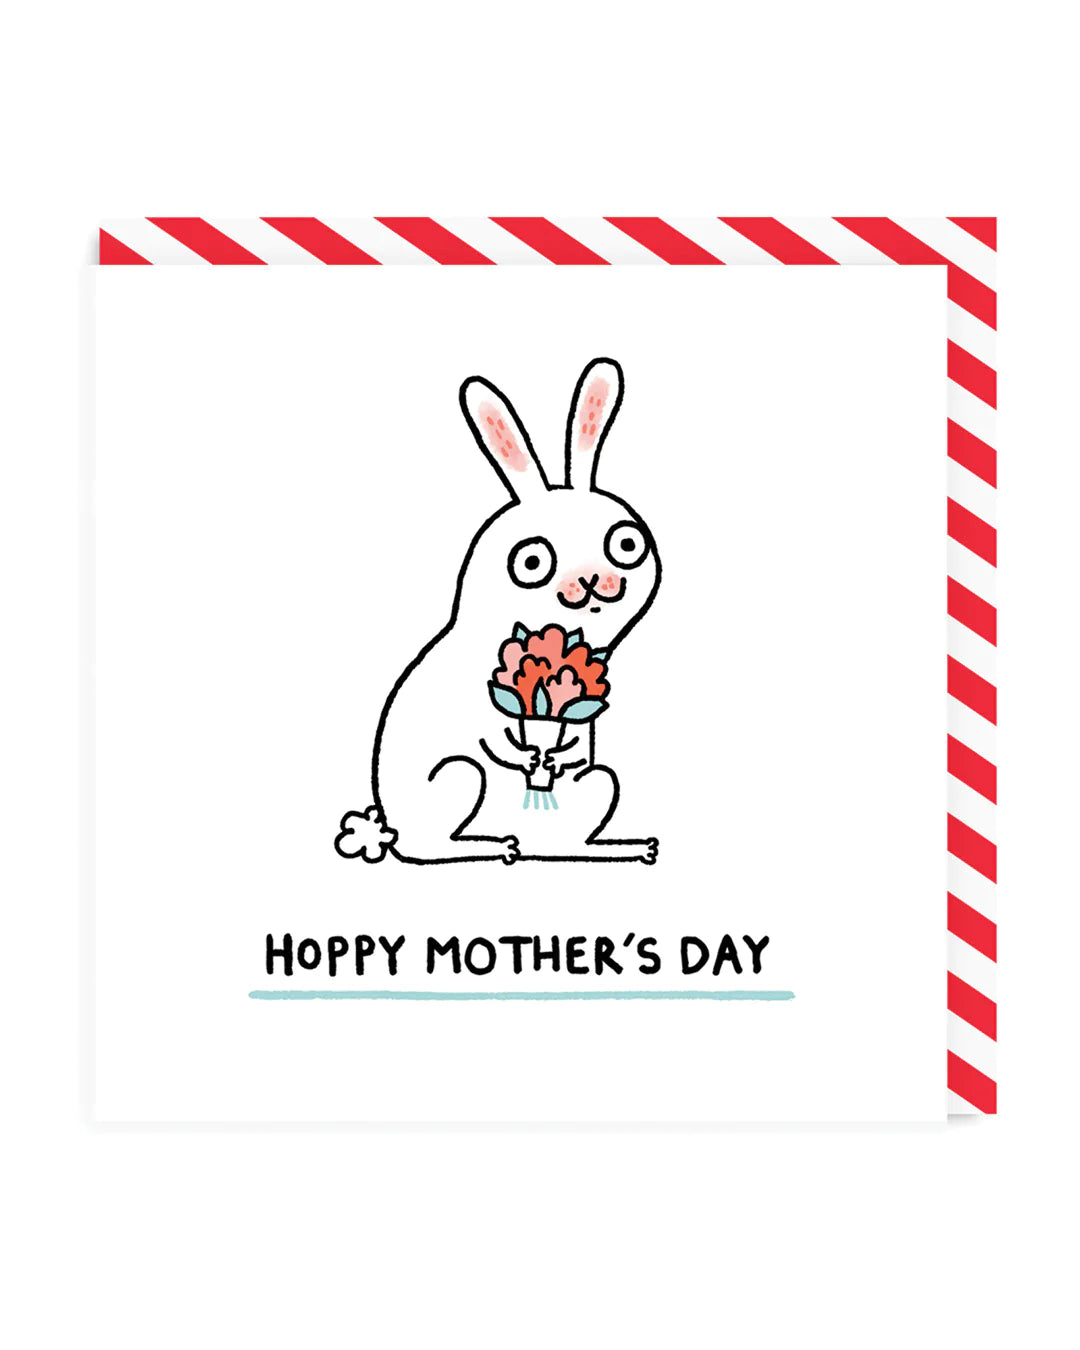 Hoppy Mother's Day Gemma Correll Card by penny black